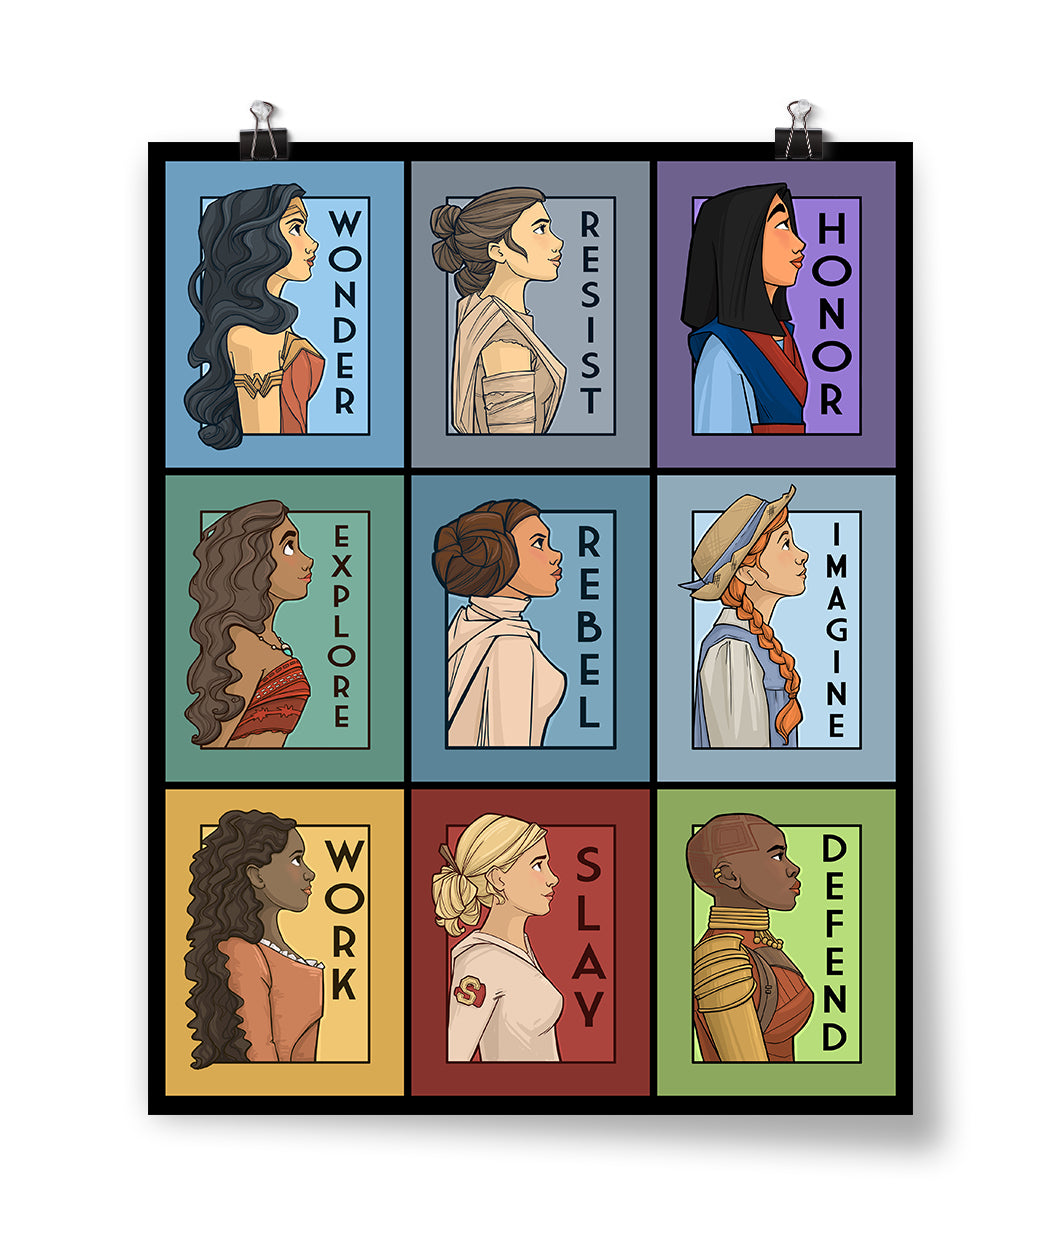 The She Series poster from Karen Hallion depicts a grid of nine profiles of powerful main characters from stories, each with a word written next to them.